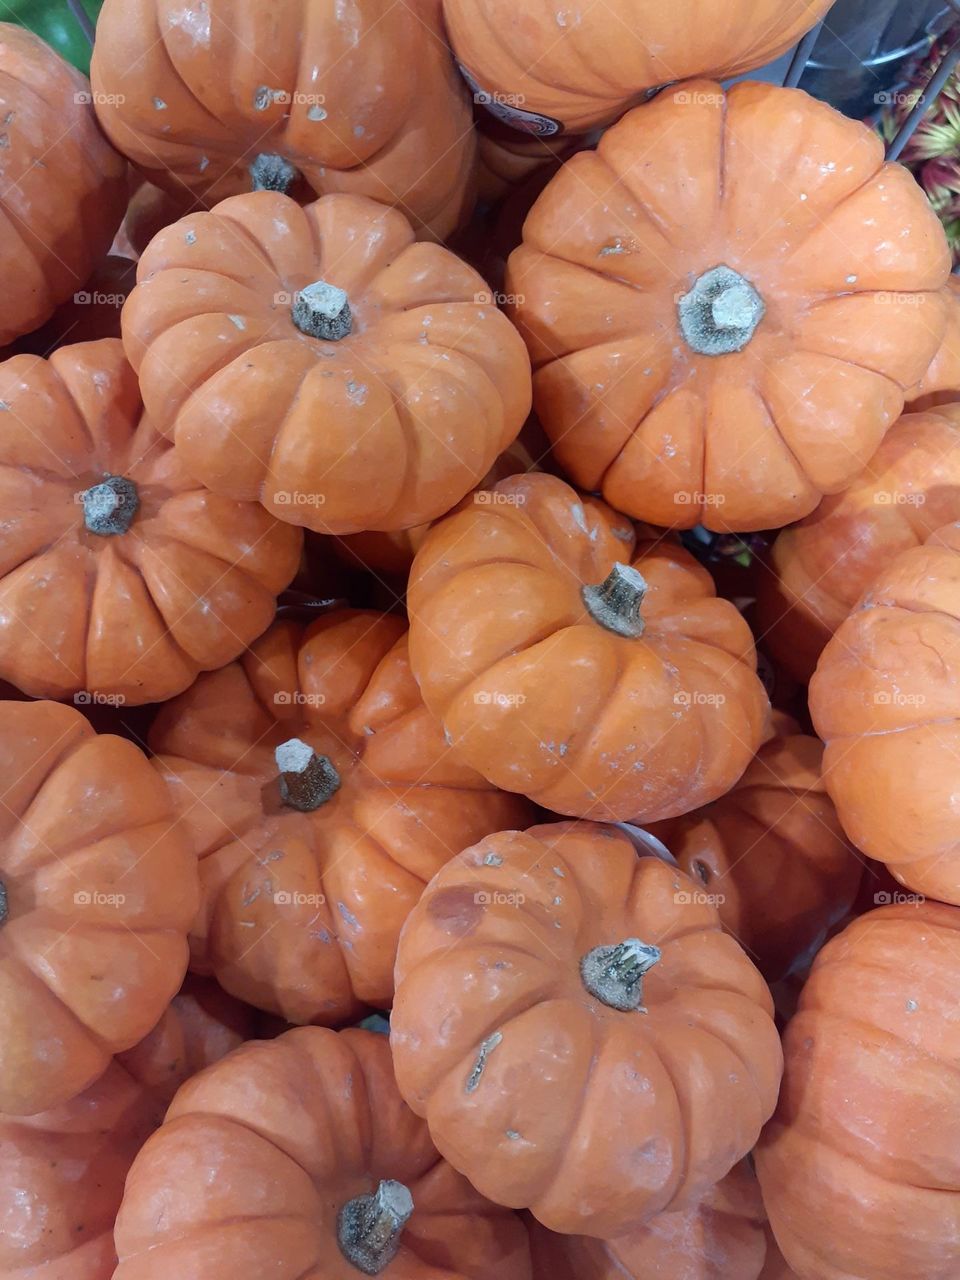 Many orange miniature pumpkins are in a container at a local grocery store in Central Florida.